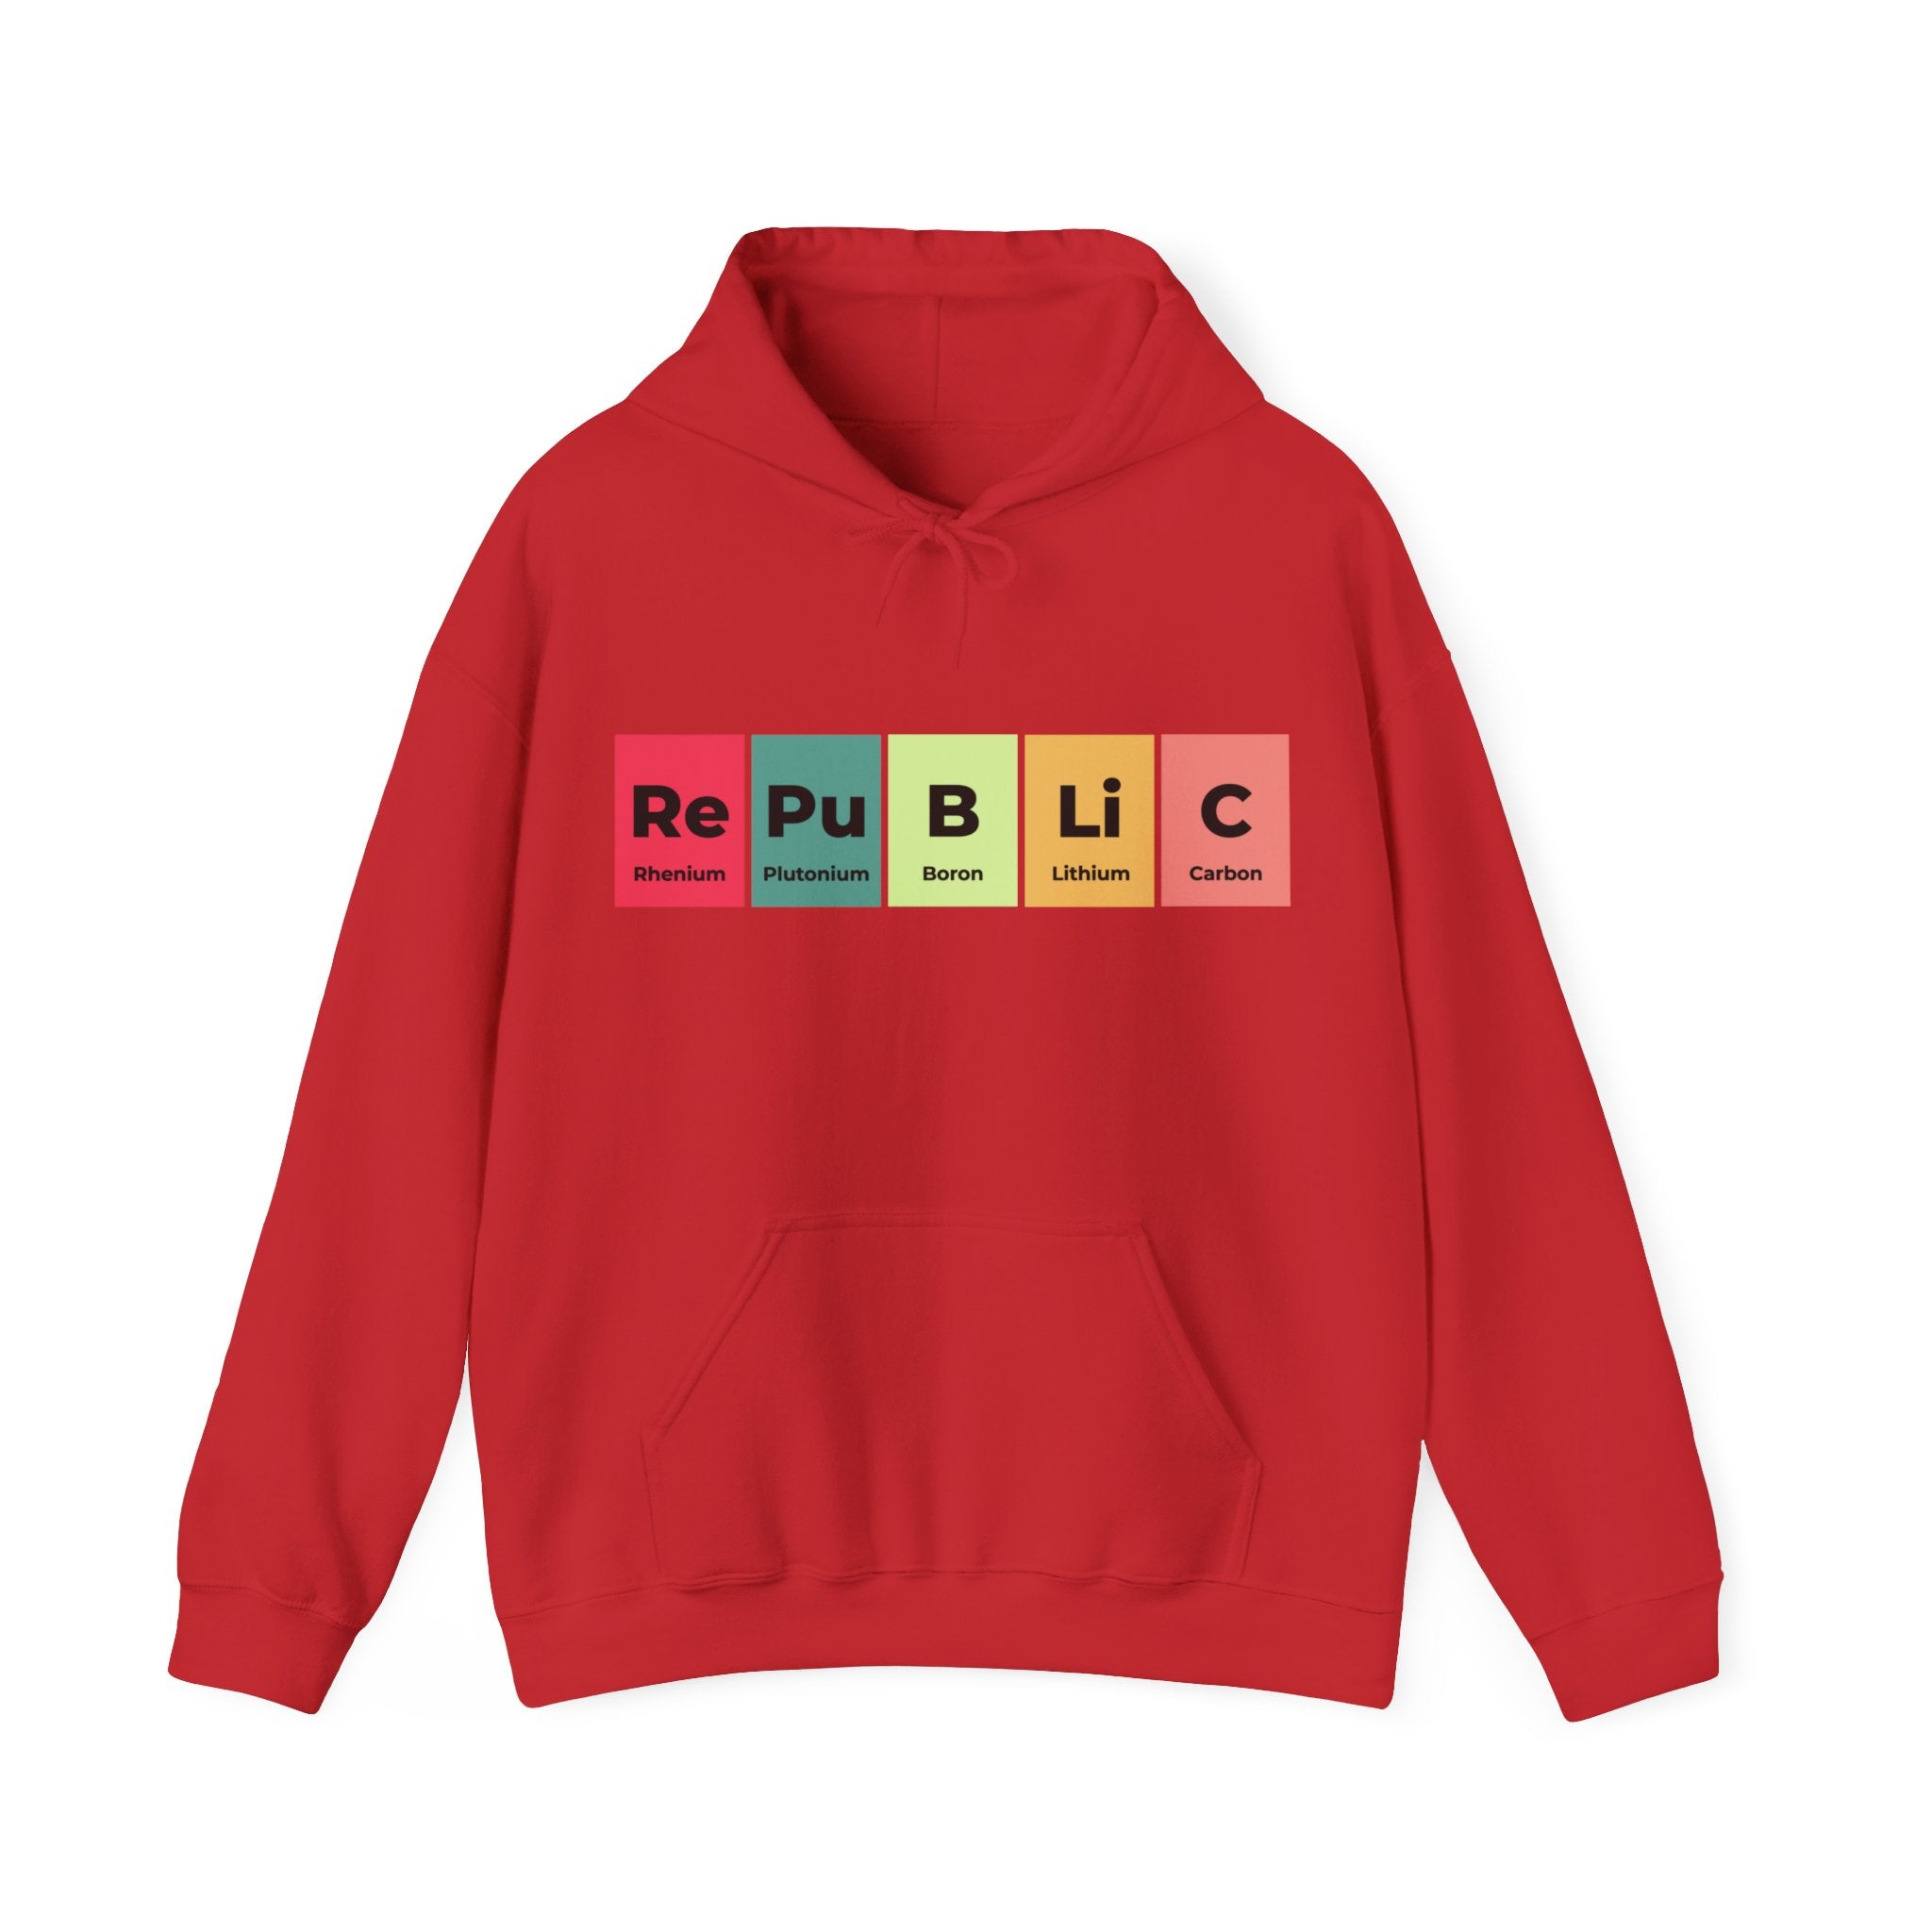 Red hooded sweatshirt with a design mimicking the periodic table of elements, spelling "Republic" using the symbols for Rhenium, Plutonium, Boron, Lithium, and Carbon. Show your patriotic pride with this stylish piece from Republic designs. Get your very own Republic - Hooded Sweatshirt today!